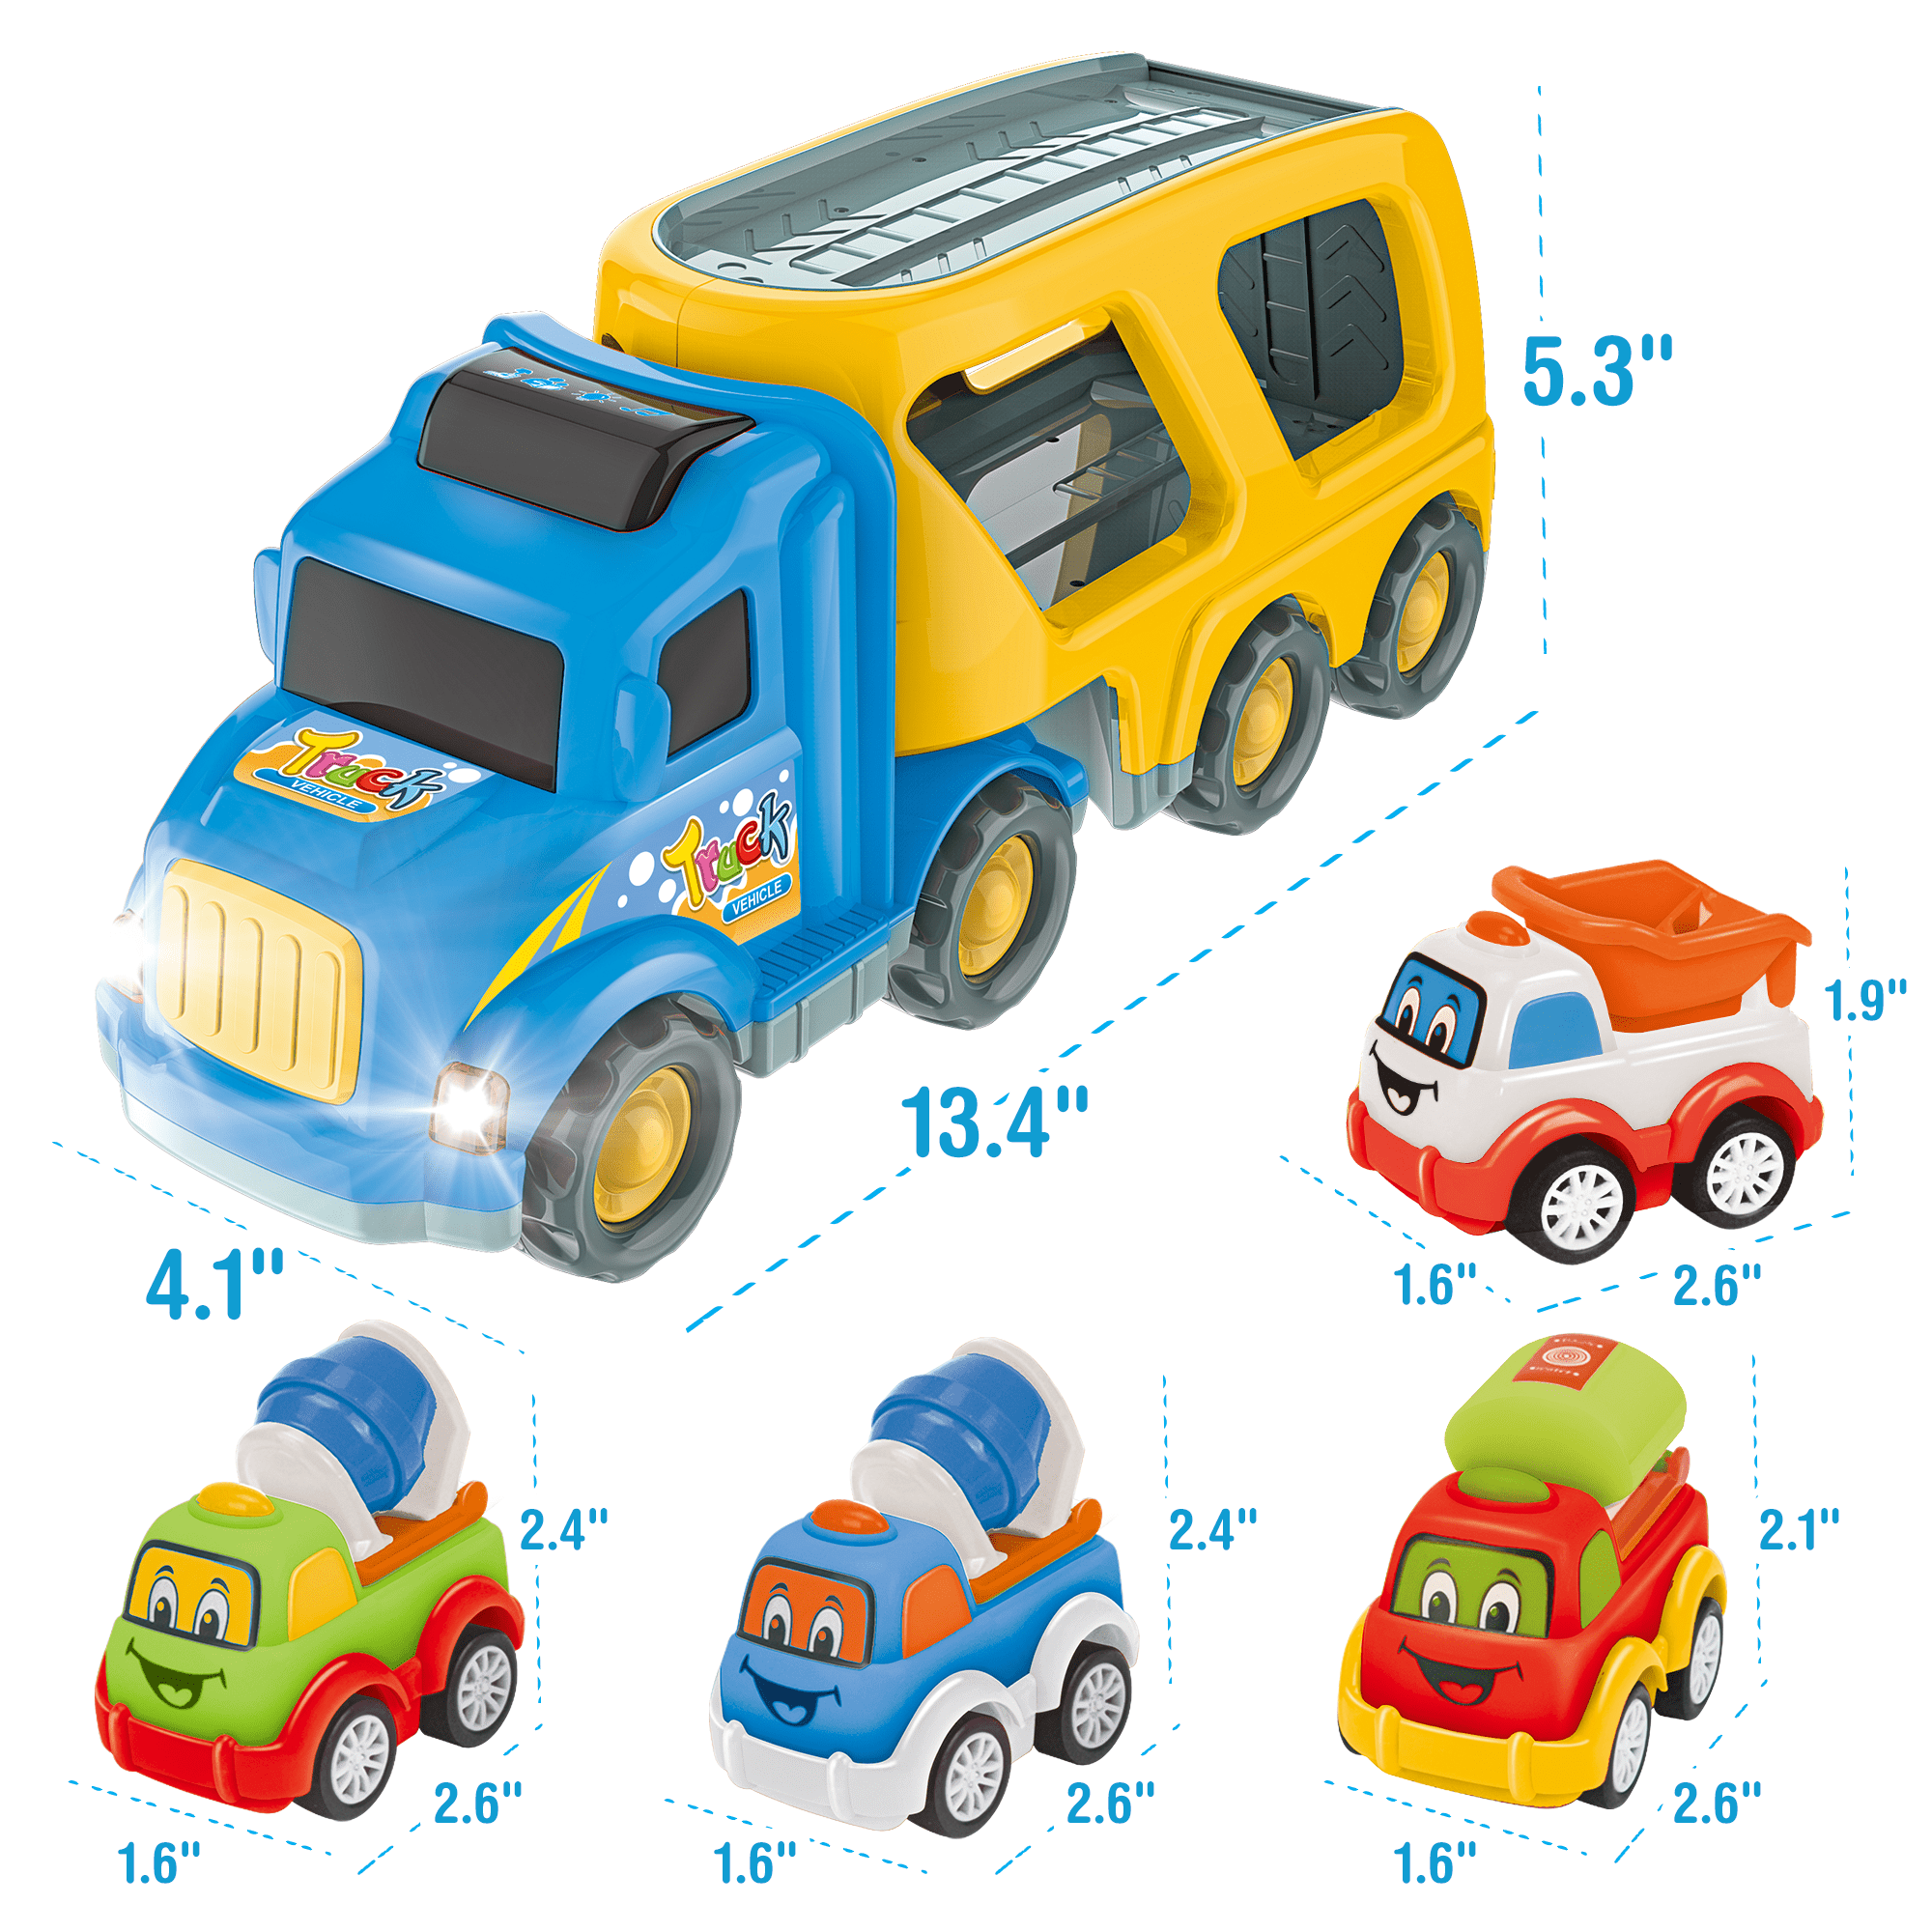 Toys For 3 Year Old Boys,kids Toys For Toddler Boys Girls,17pcs Deformable  Construction Toys With 4 Mini Vehicles Toys For 3 4 5 6 7 Year Old Boy,educ